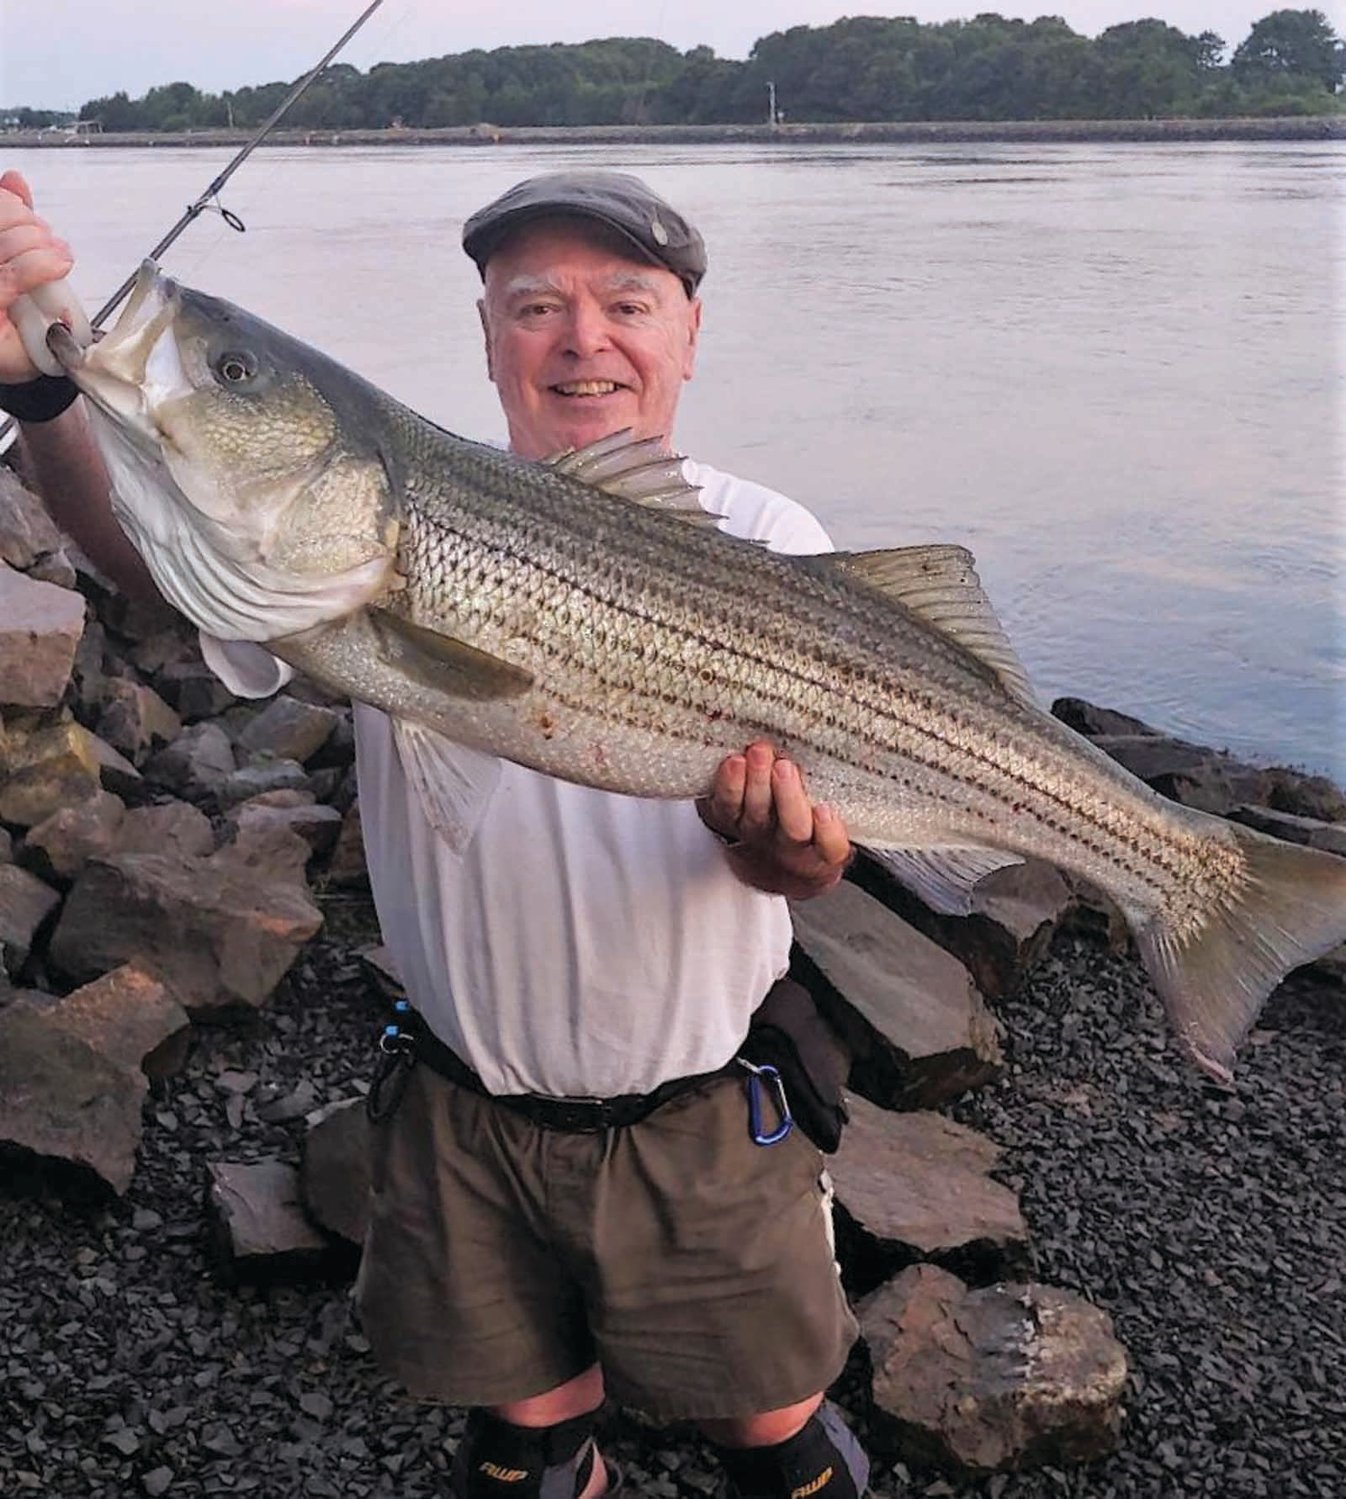 STRIPED BASS: East End Eddy Doherty with a Cape Cod Canal striped bass. Massachusetts anglers alone spend $600-million annually to pursue striped bass says a Division of Marine Fisheries study. (Submitted photo)